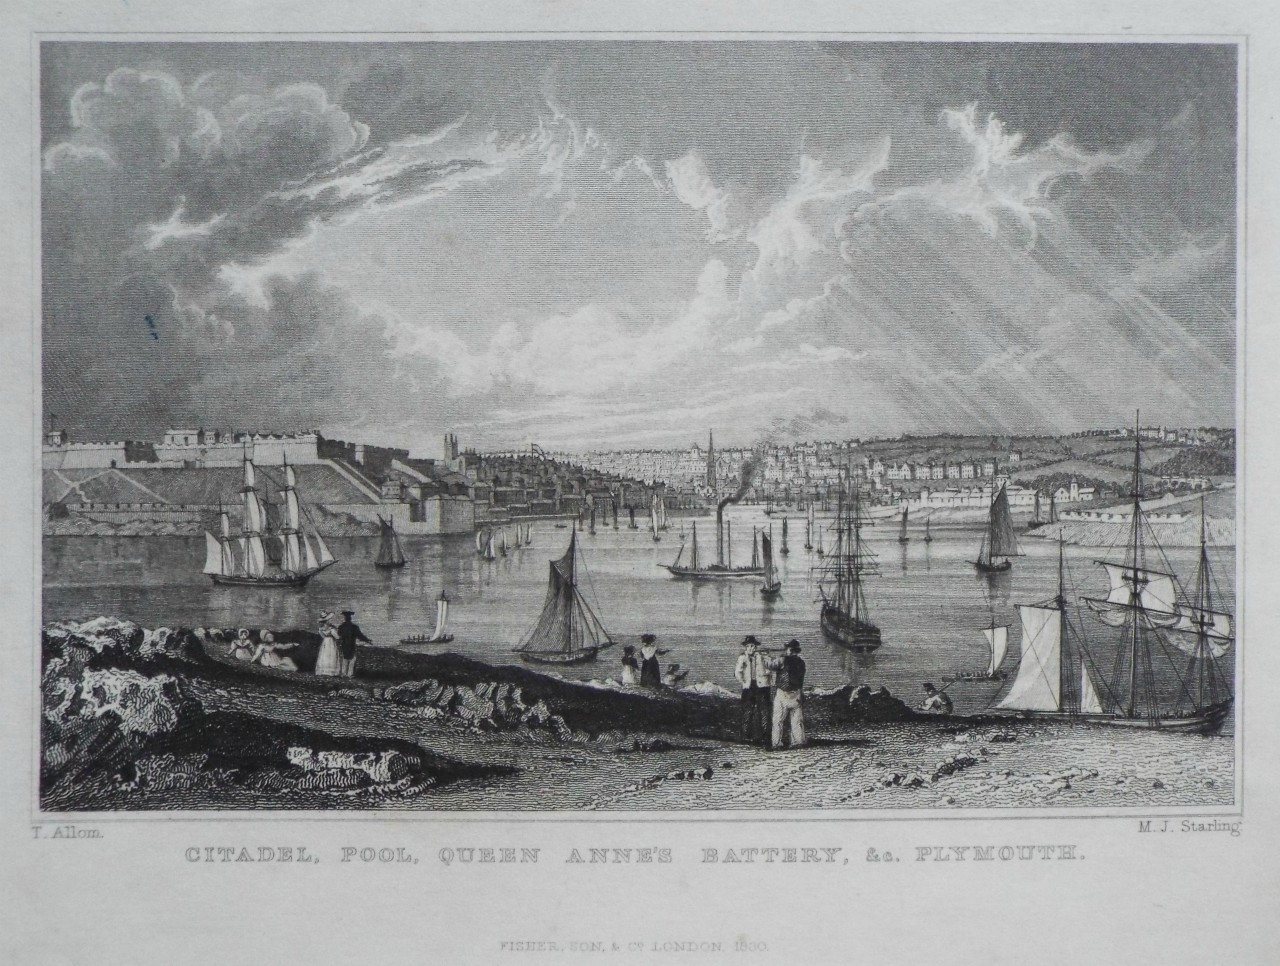 Print - Citadel, Pool, Queen Mary's Battery, &c. Plymouth. - Starling